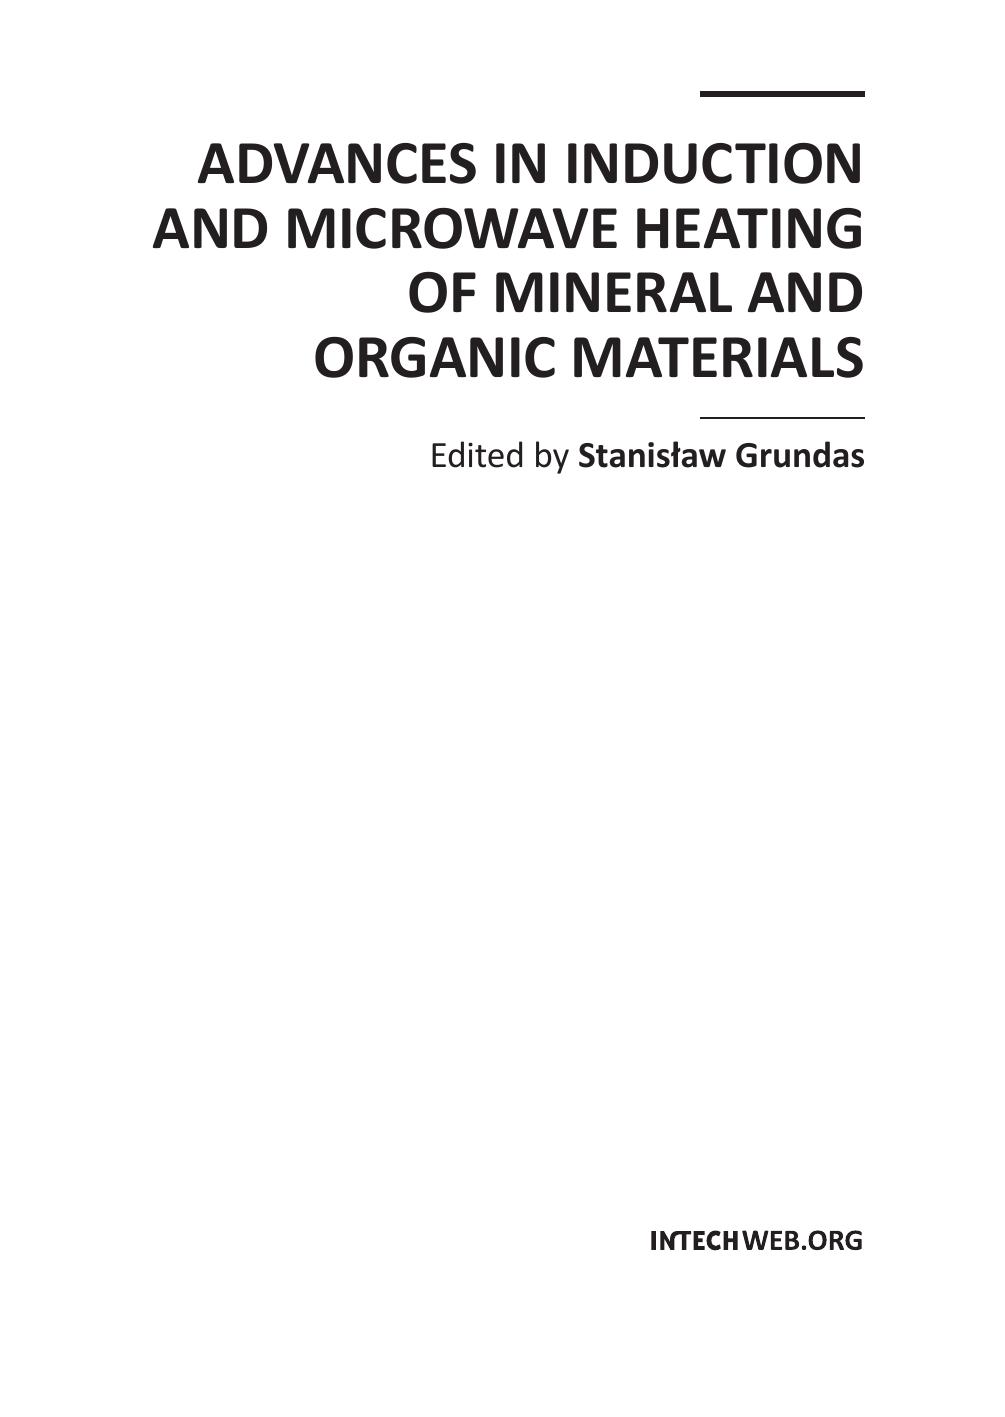 Advances in Induction and Microwave Heating of Mineral and Organic Materials.indd